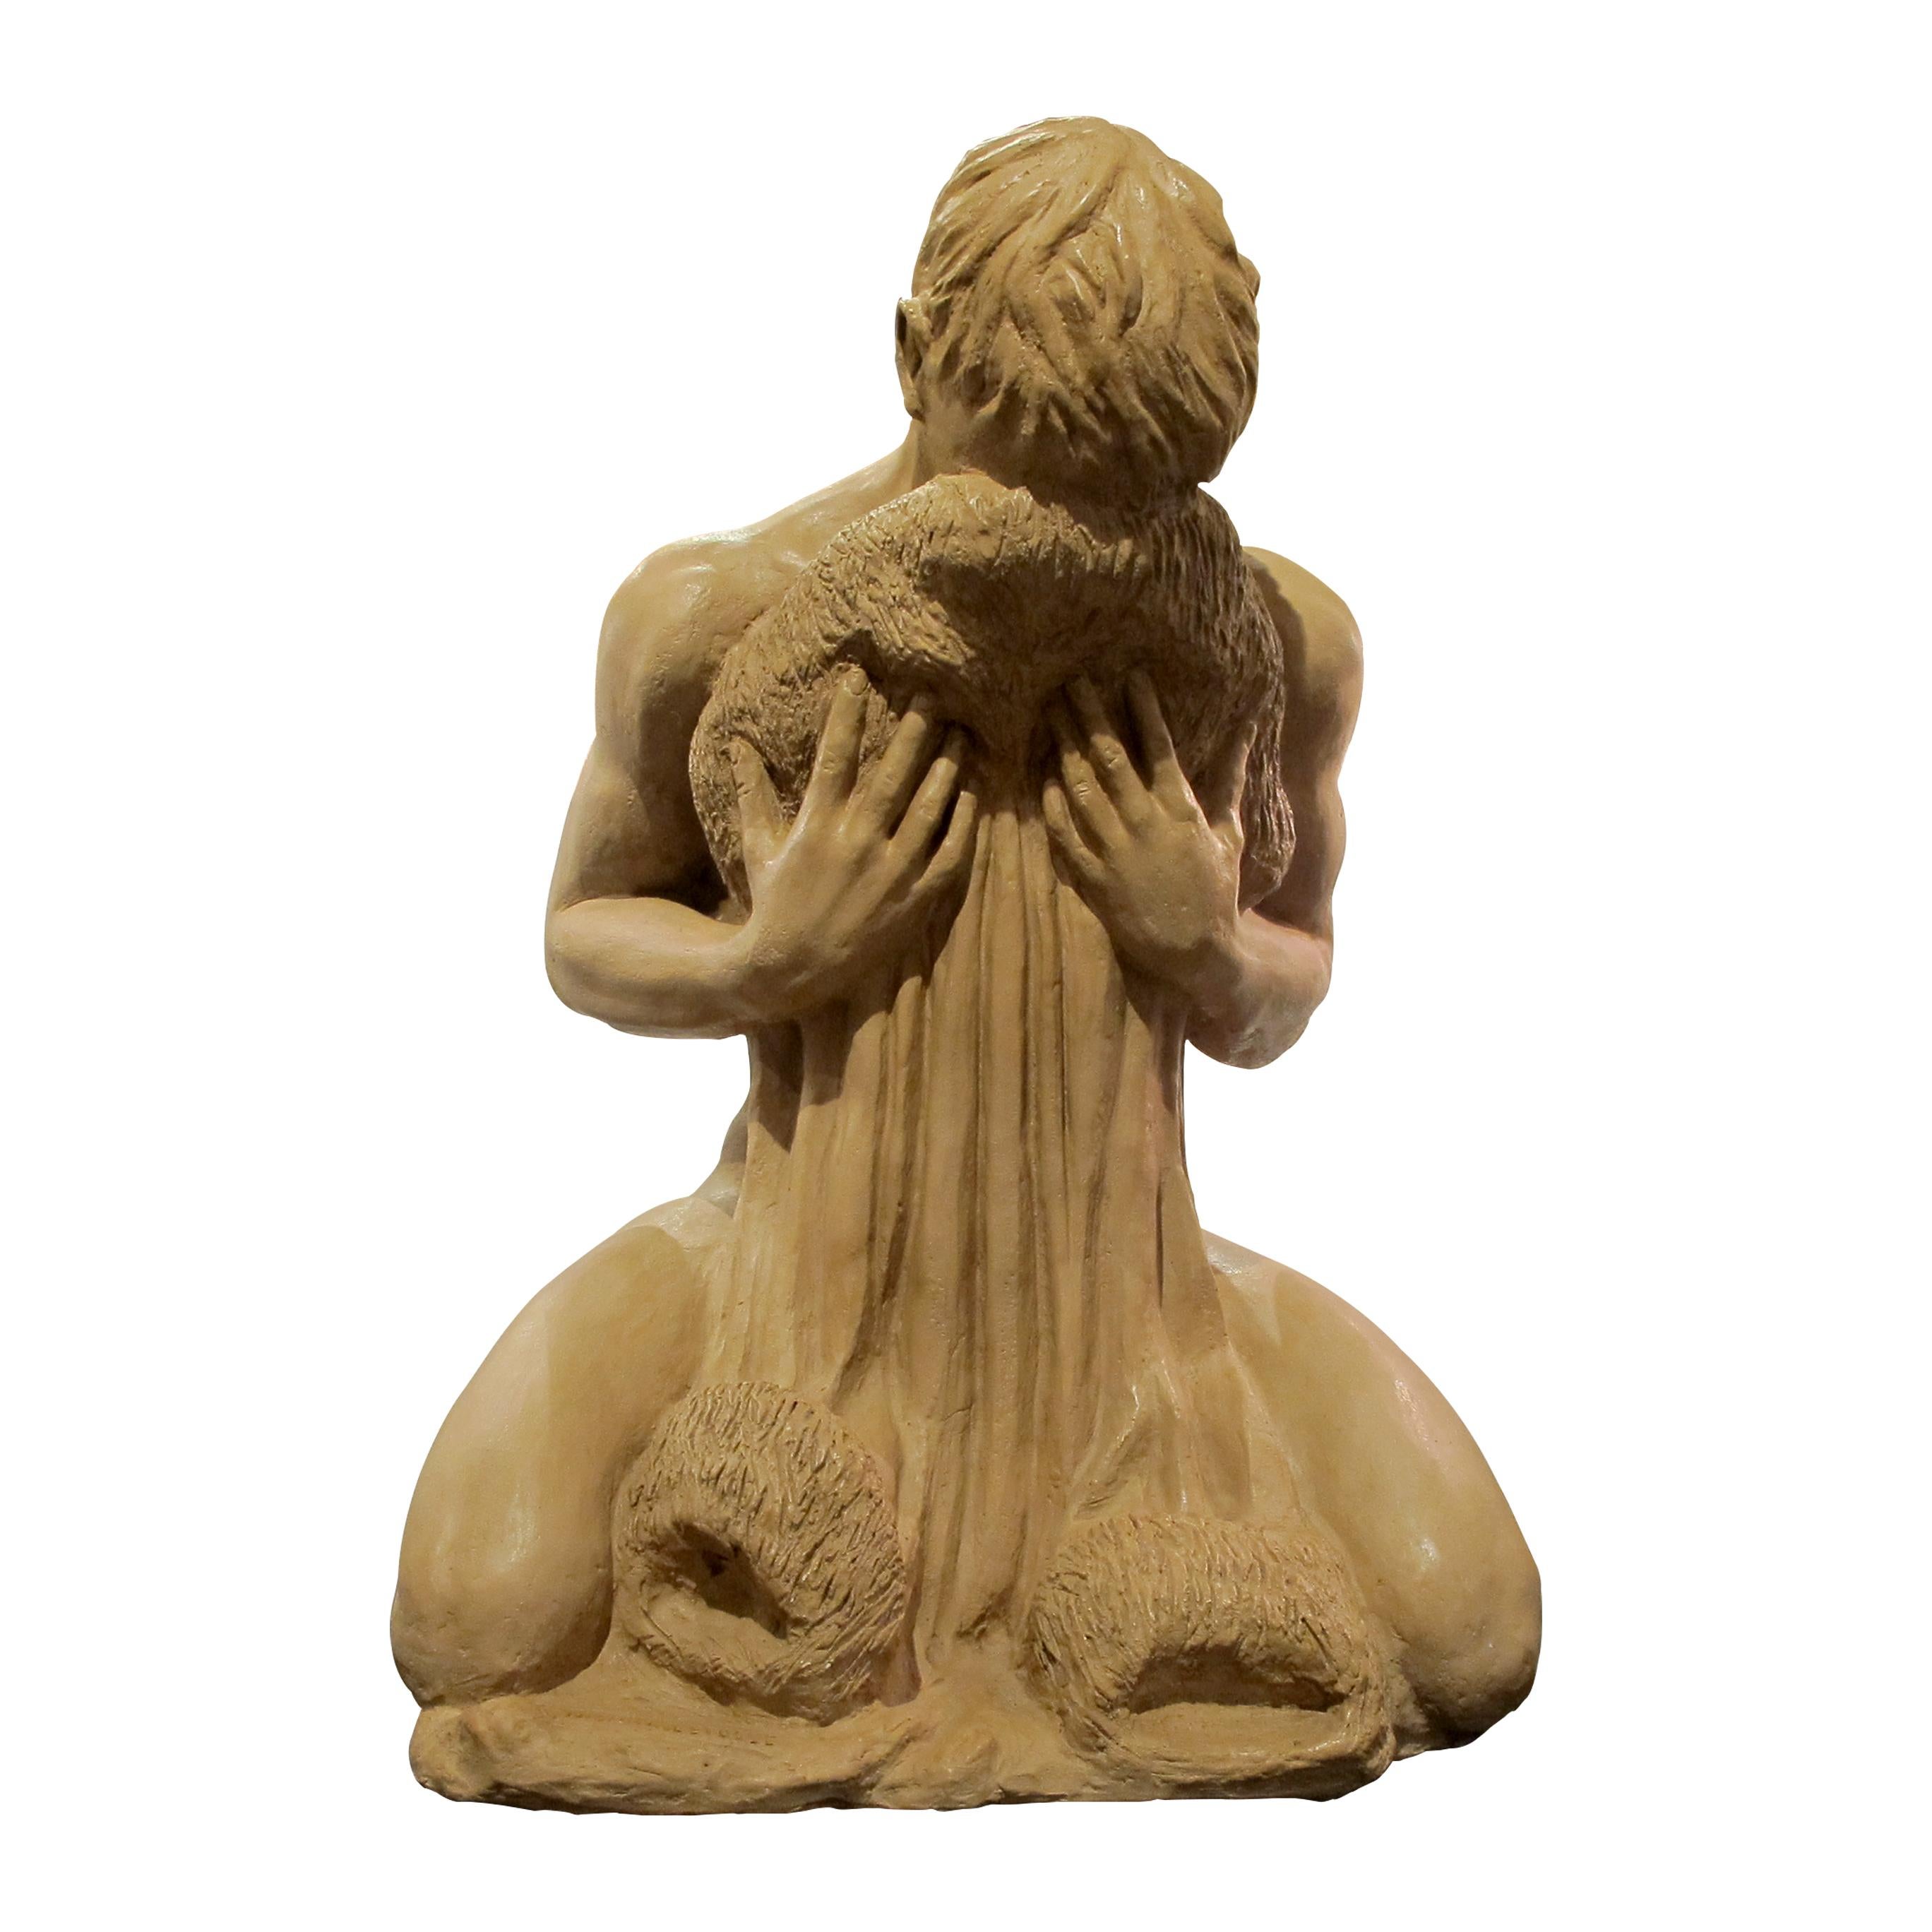 Very elegant hollowed terracotta sculpture of a nude young man kneeling, 1950s French. The artist achieved a smooth terracotta finish for the young man by contrast with the textures on the cloth the young man is holding. It is a beautiful capture of